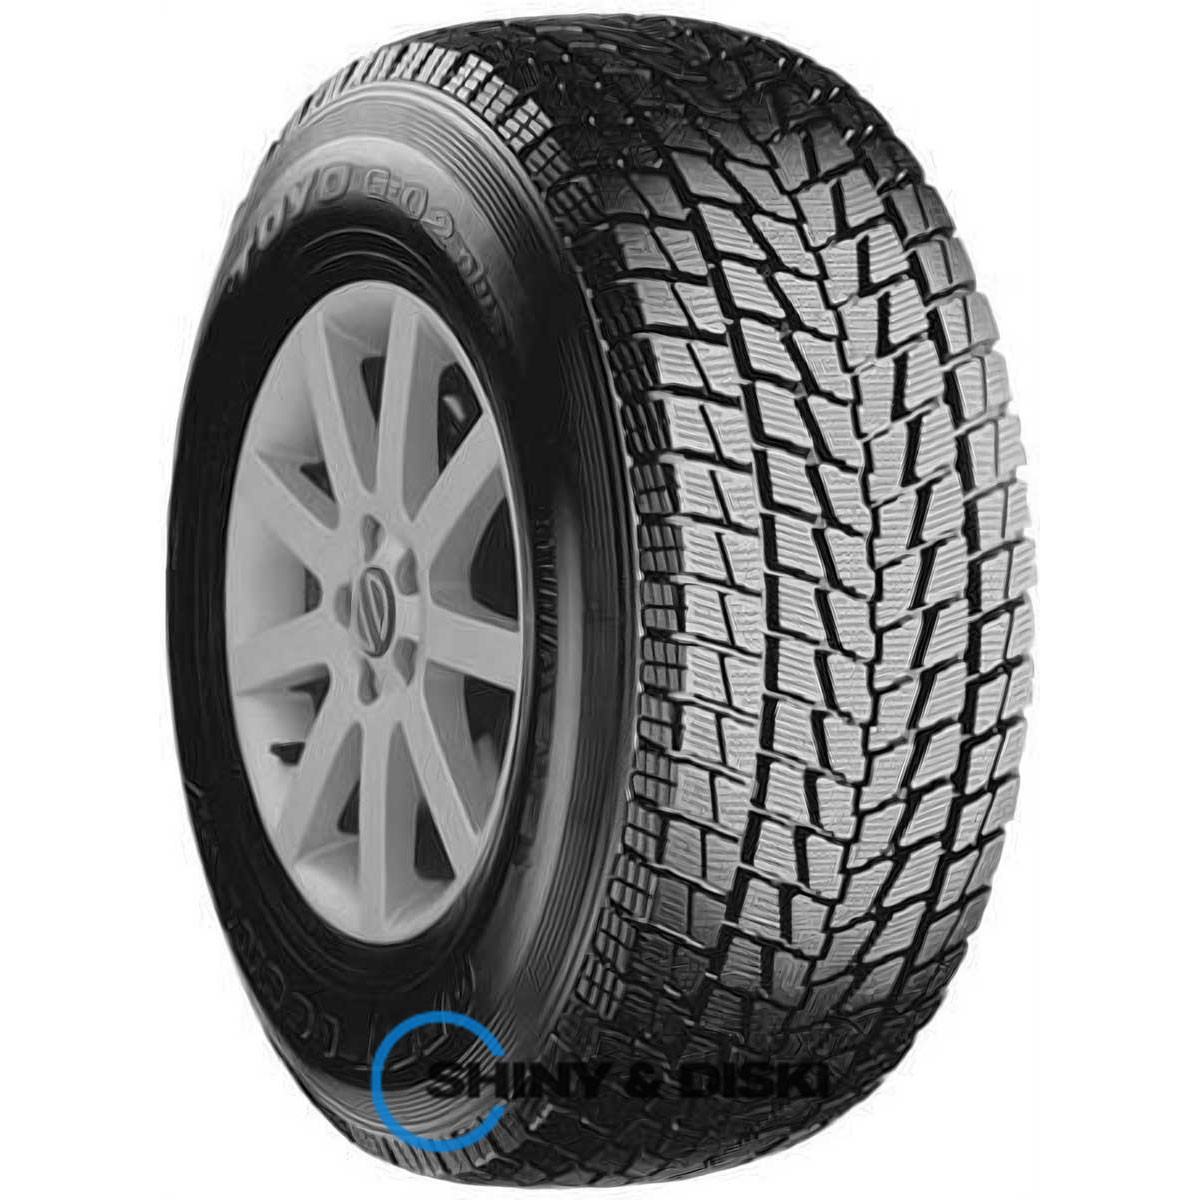 toyo open country g-02 plus 275/65 r18 123/120q